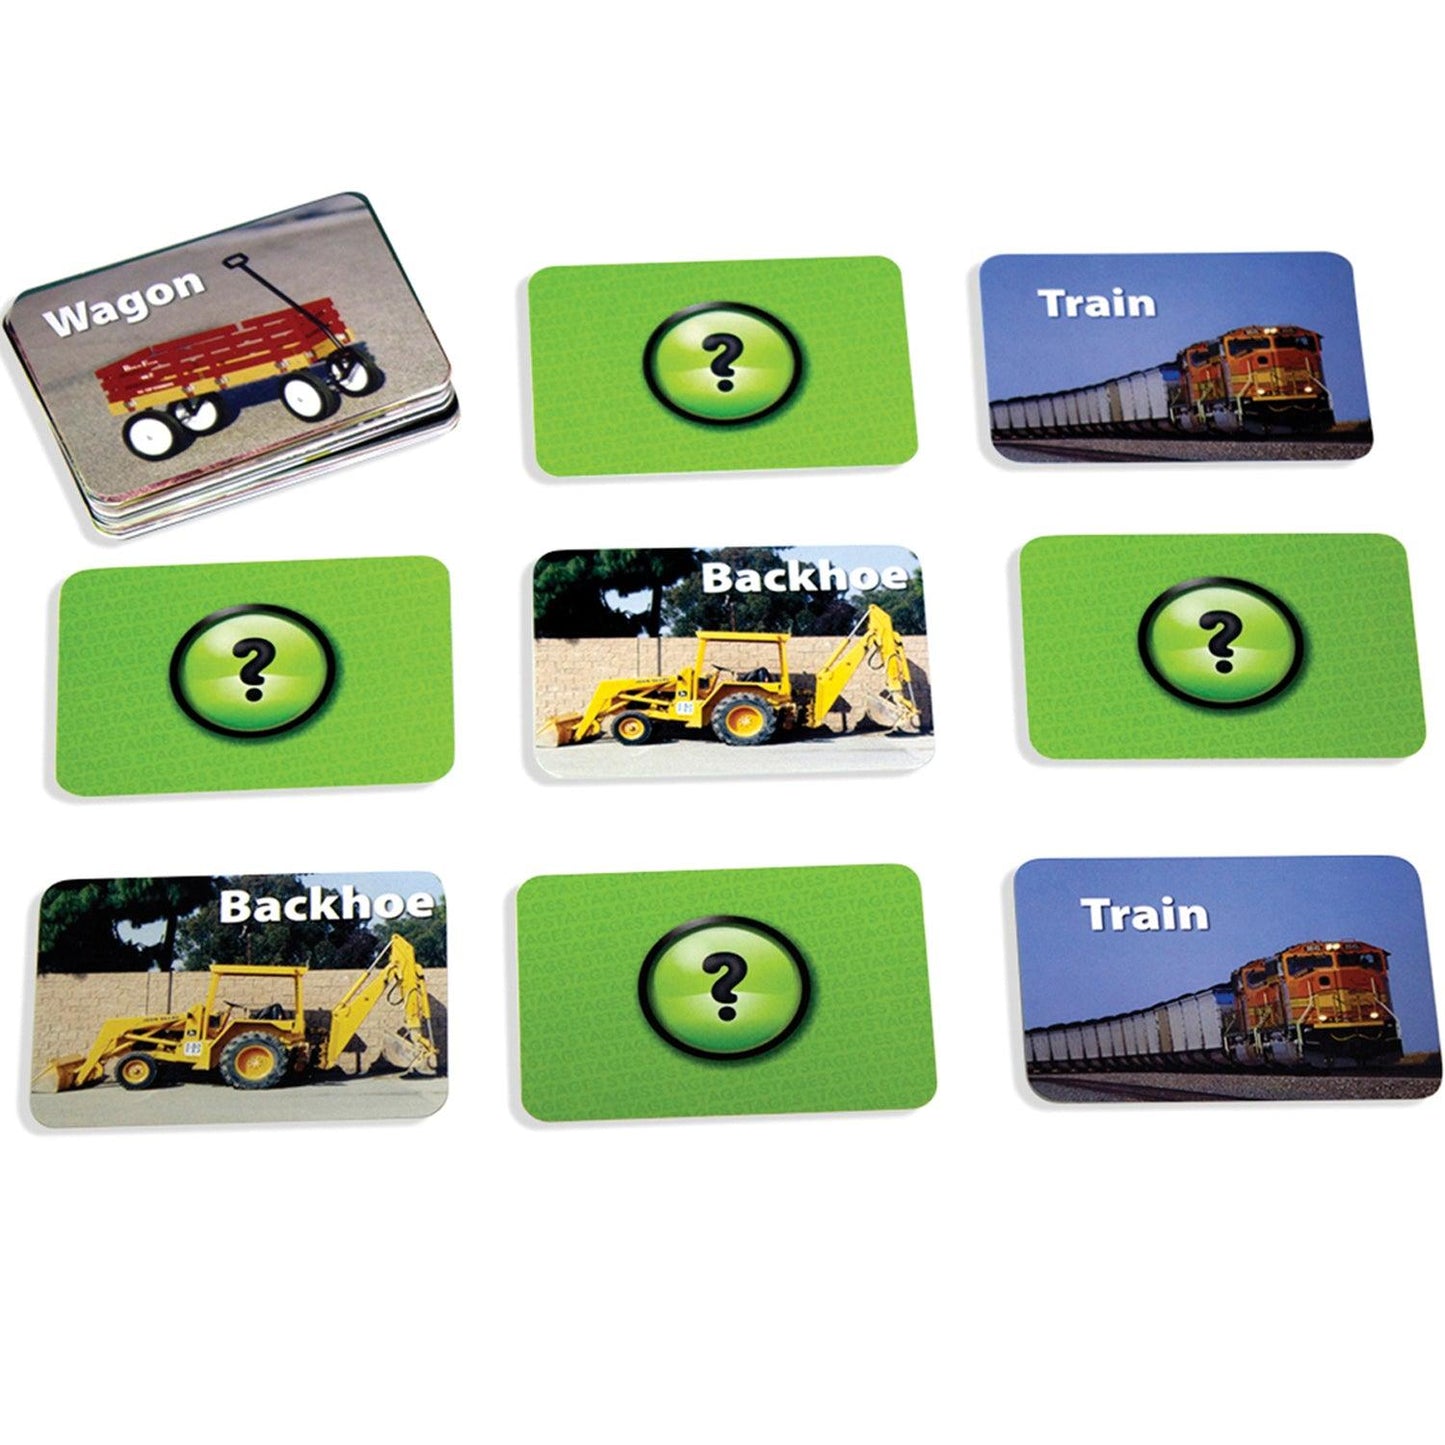 Photographic Memory Matching Game, Vehicles, Pack of 3 - Loomini